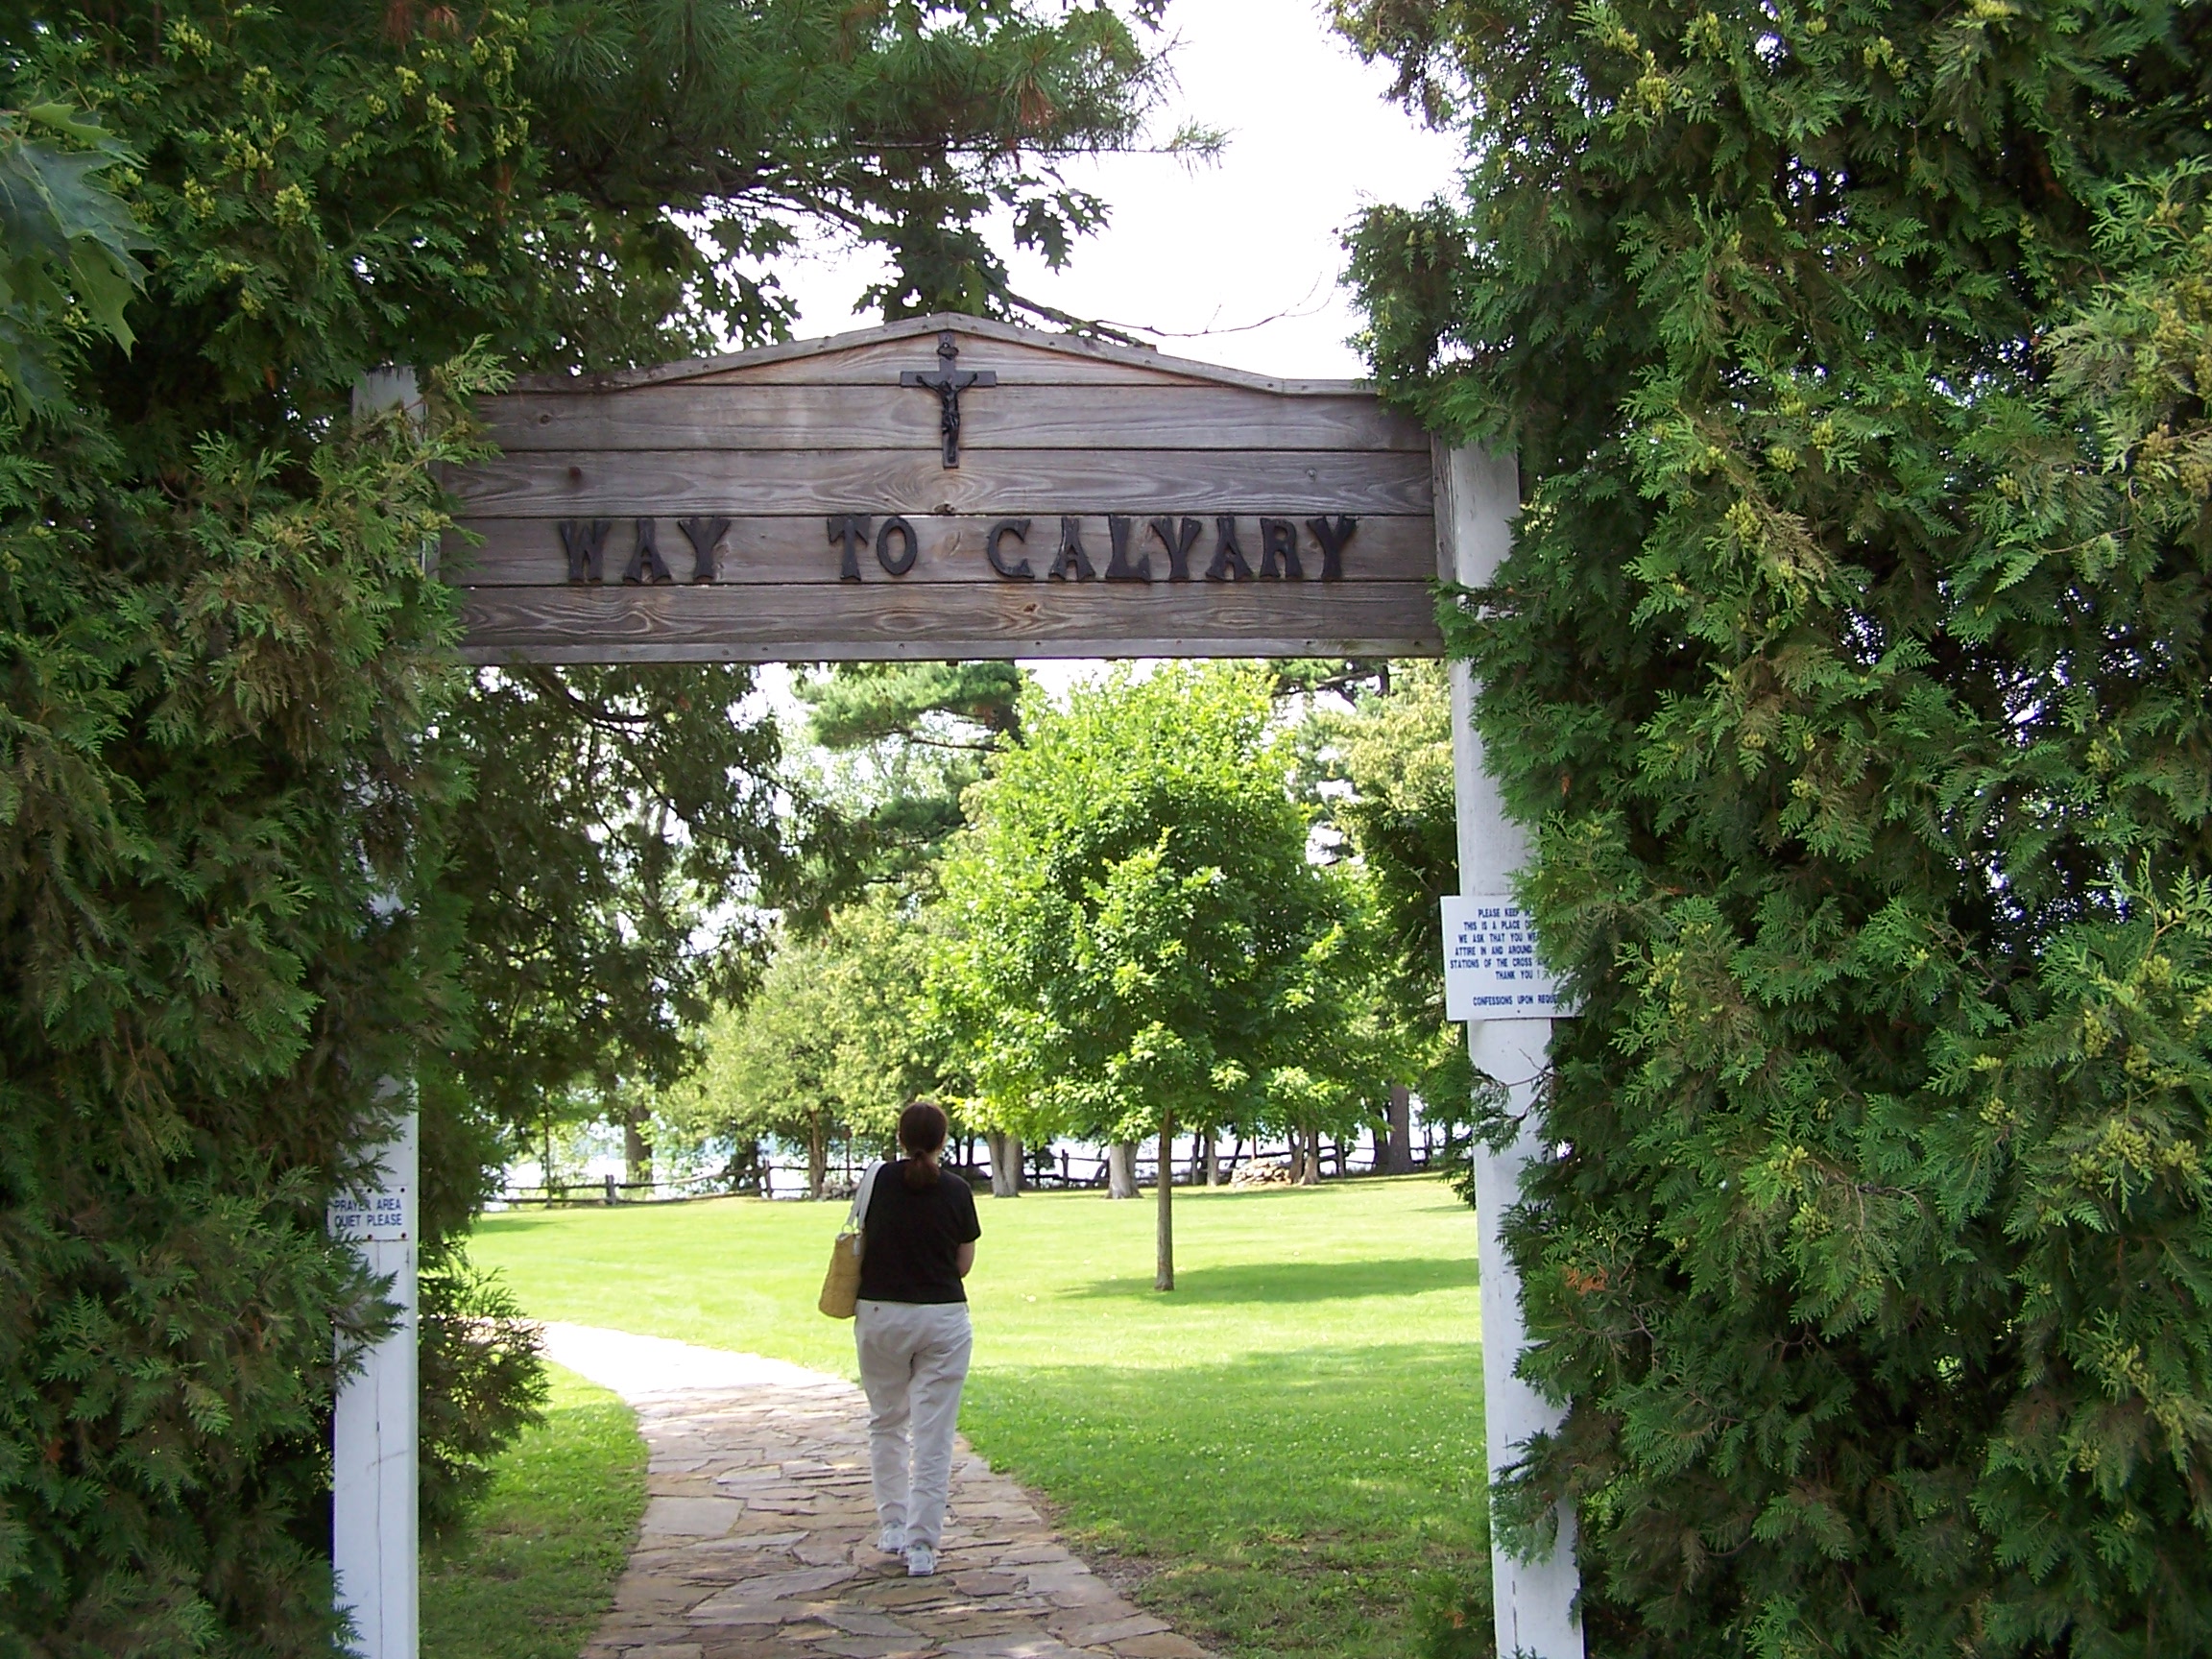 Calvary.  Saint Anne's Shrine is located on Isle LaMotte, a quiet island on Lake Champlain in Vermont. It was developed by the Society of Saint Edmund and has been maintained by them for 100 years..